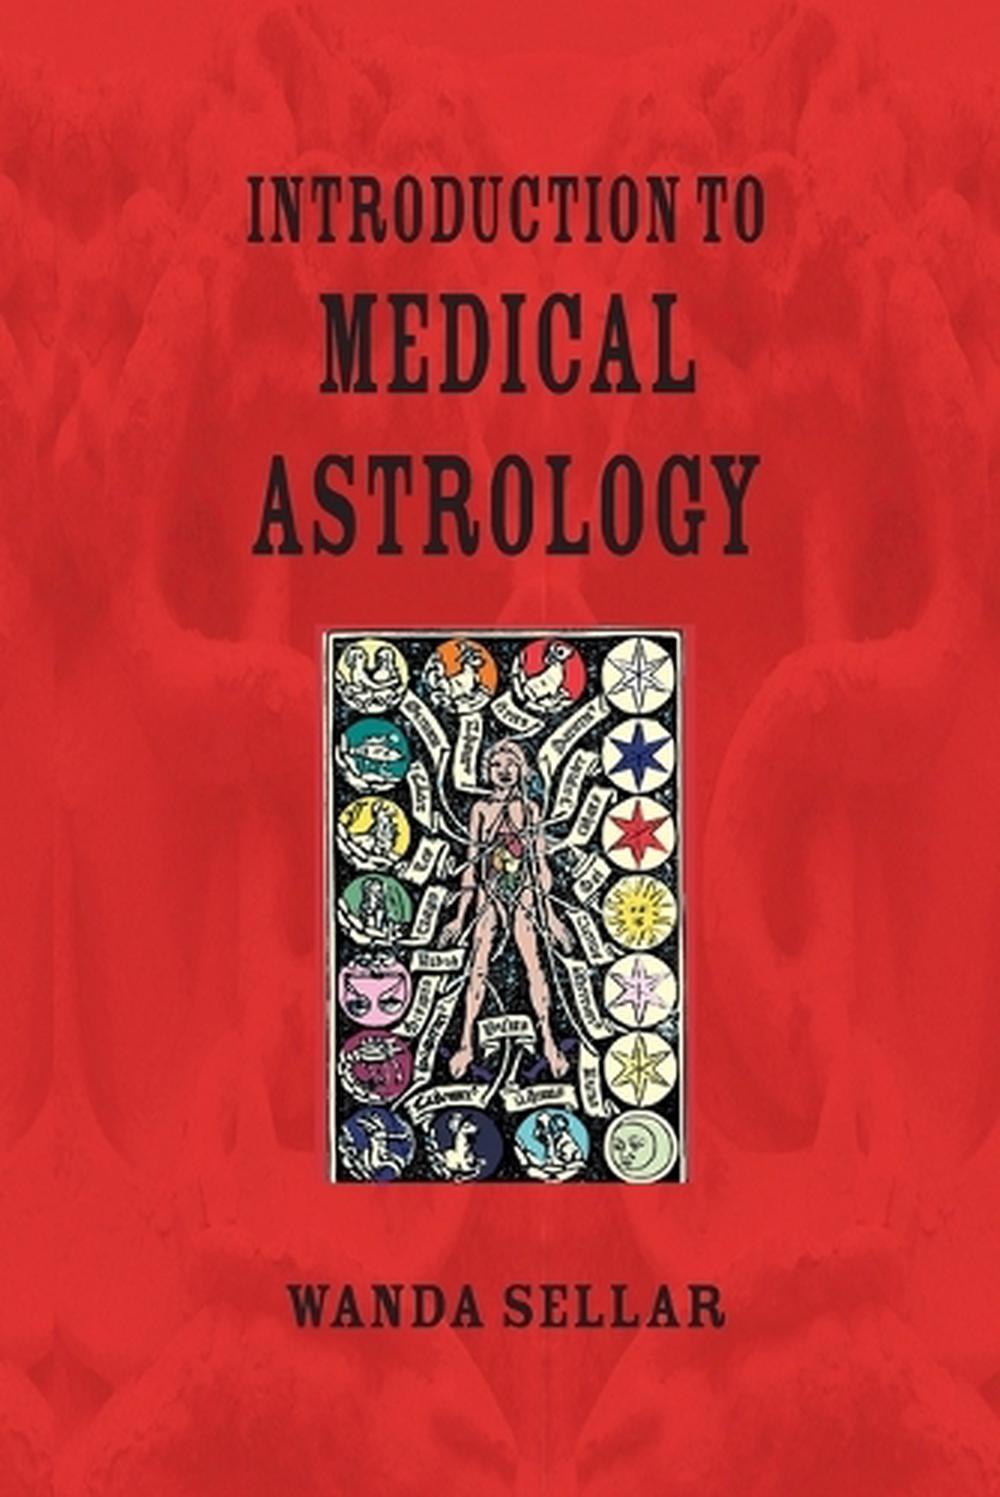 book to learn astrology